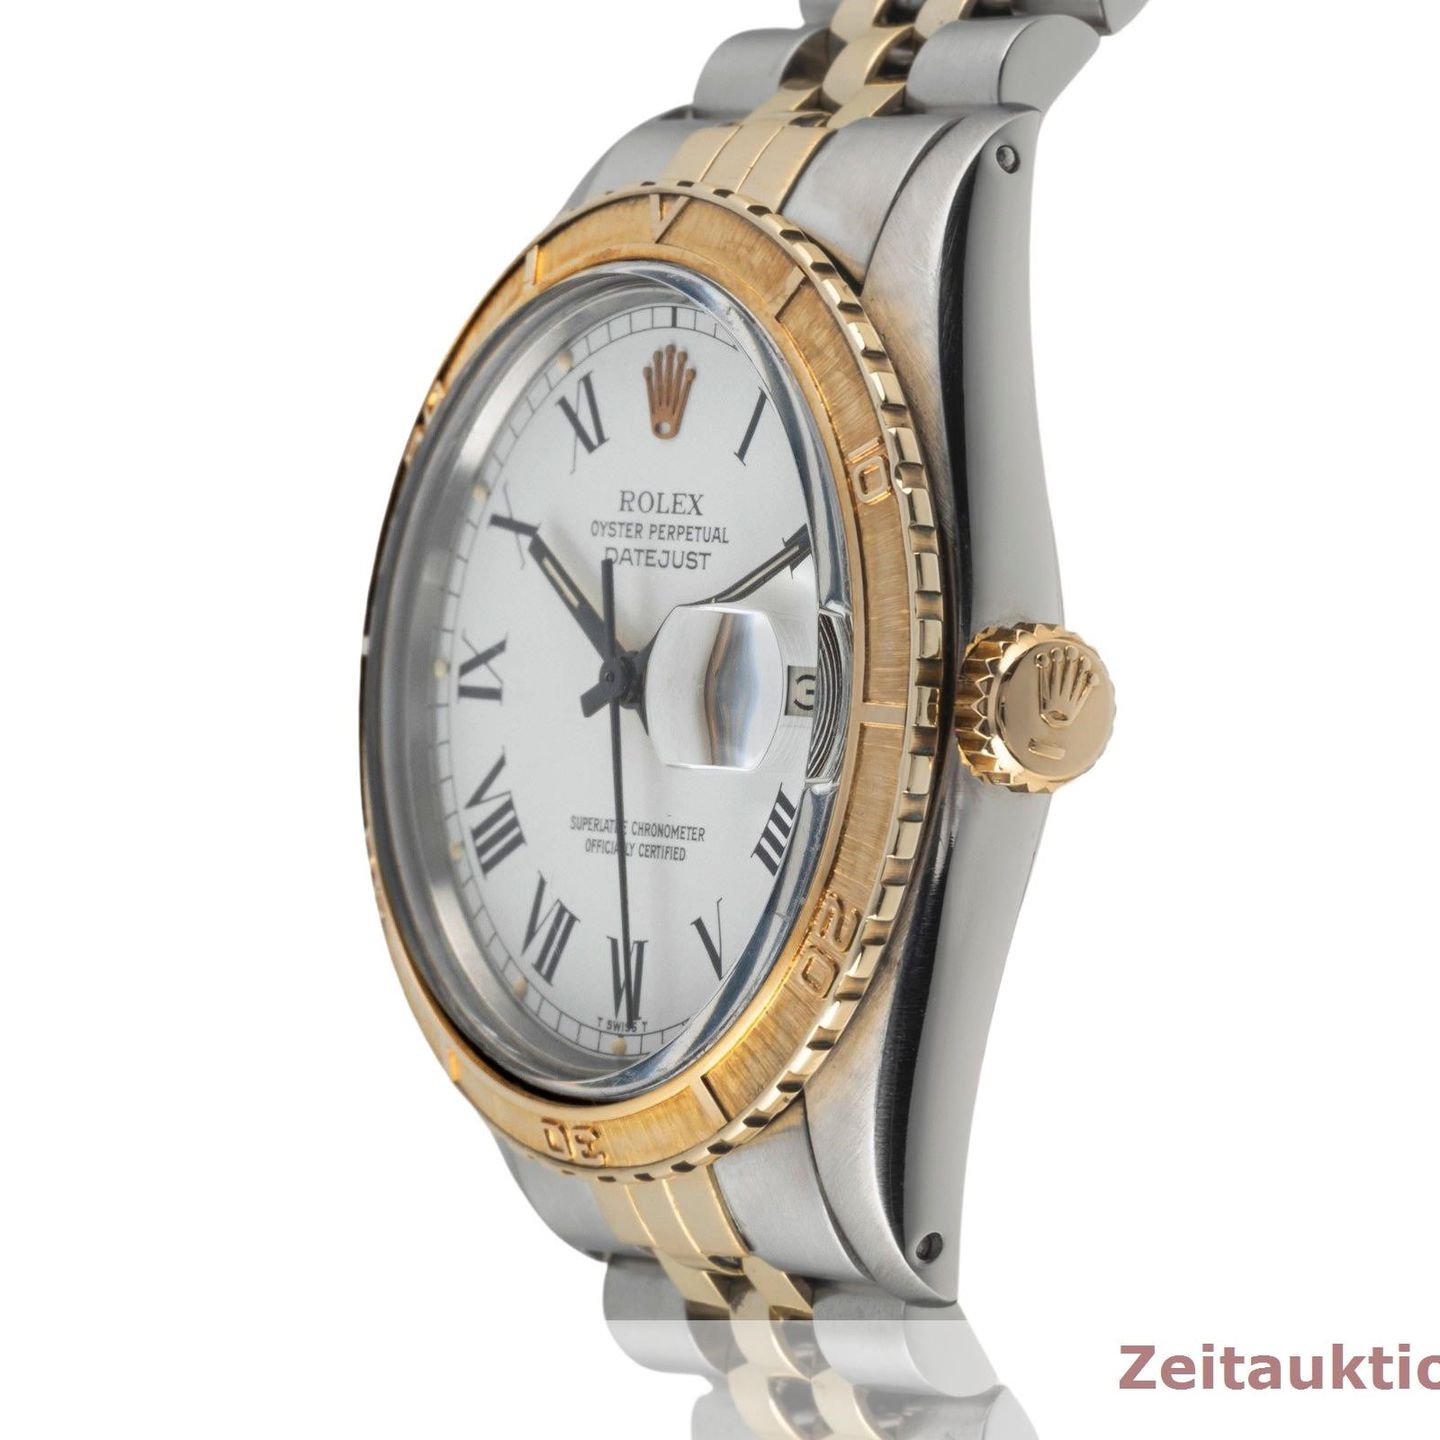 Rolex Datejust Turn-O-Graph 16253 (1979) - White dial 36 mm Gold/Steel case (6/8)